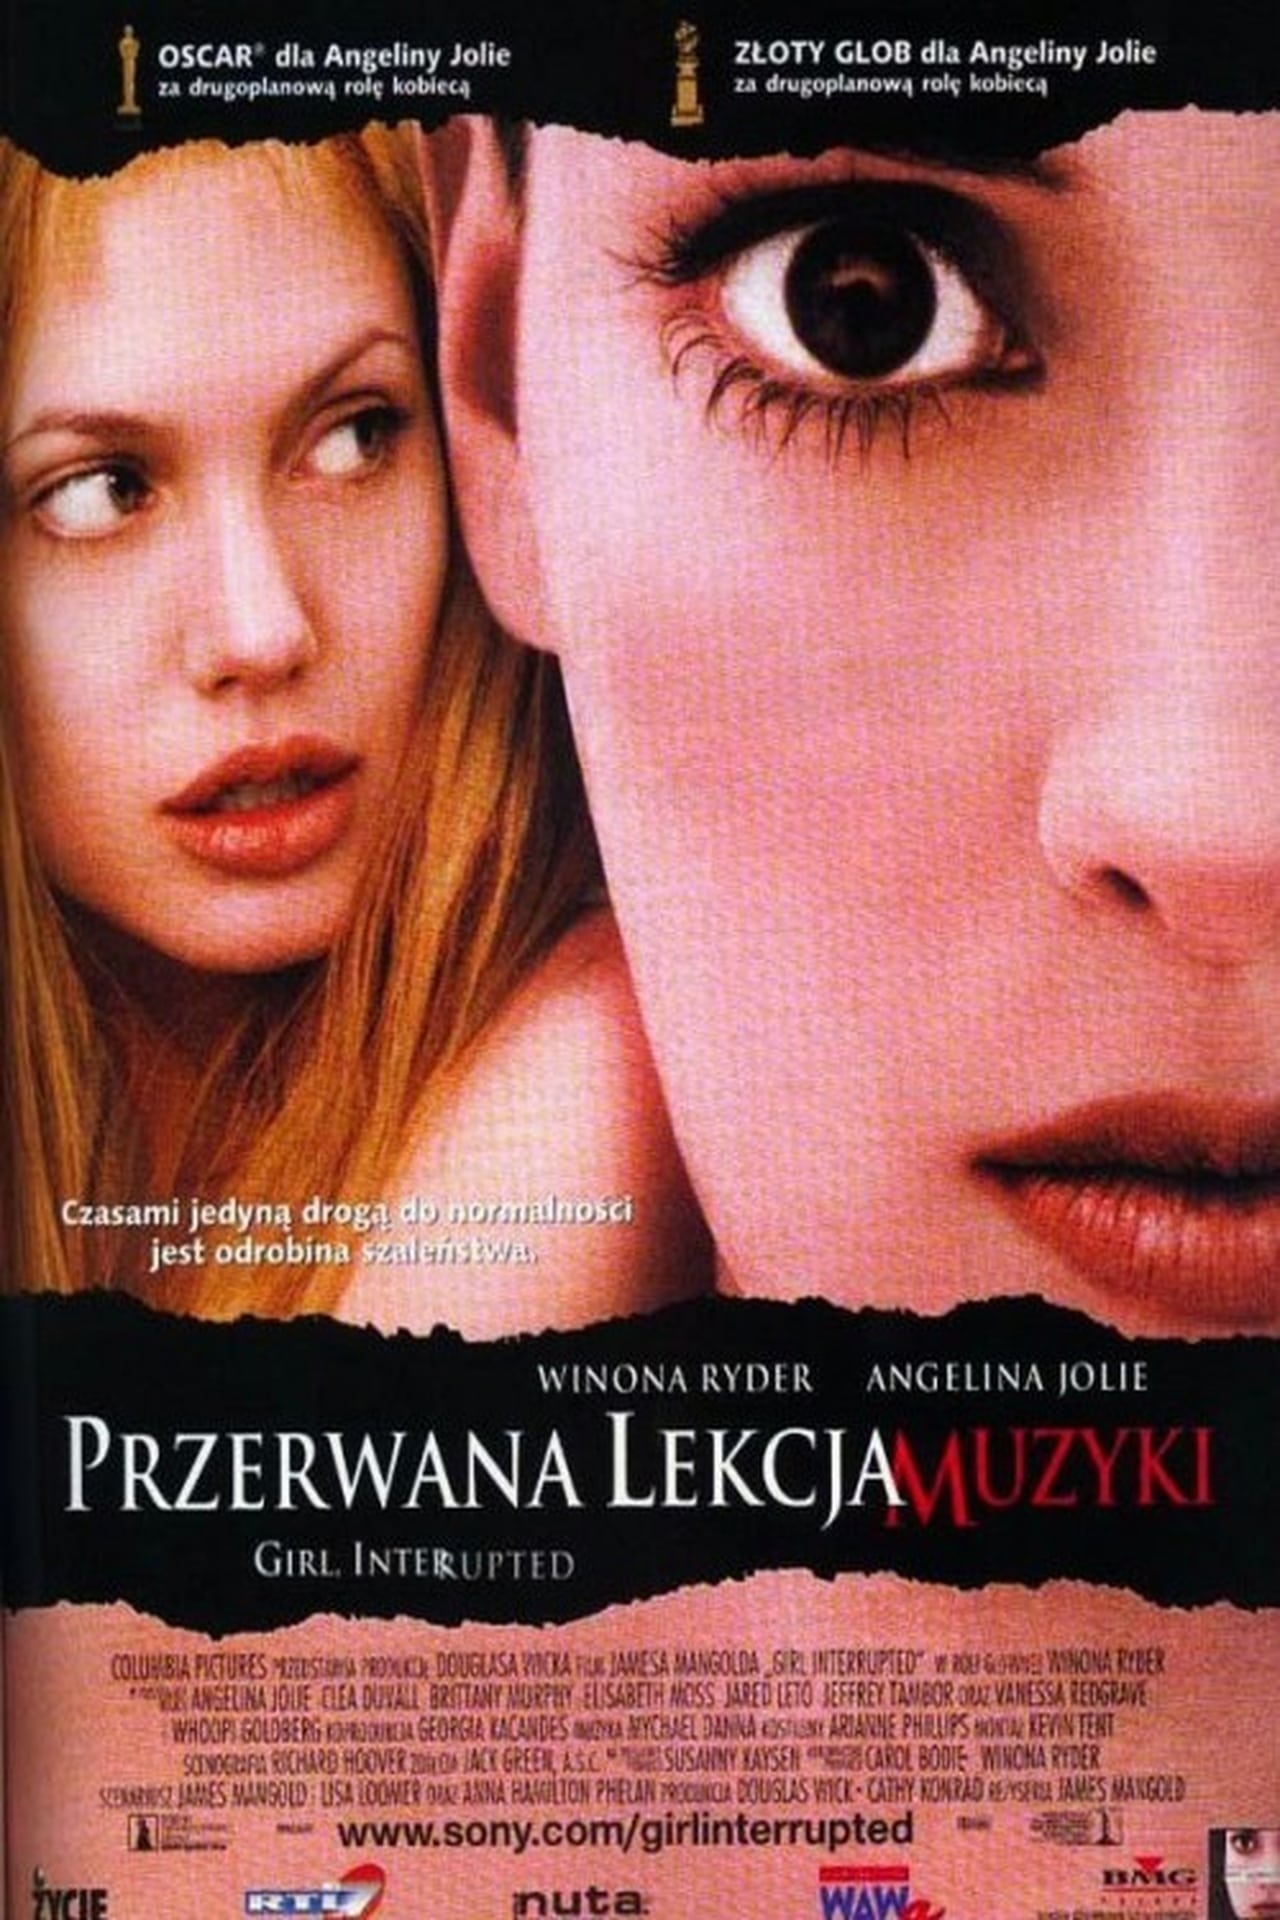 Girl, Interrupted wiki, synopsis, reviews, watch and download